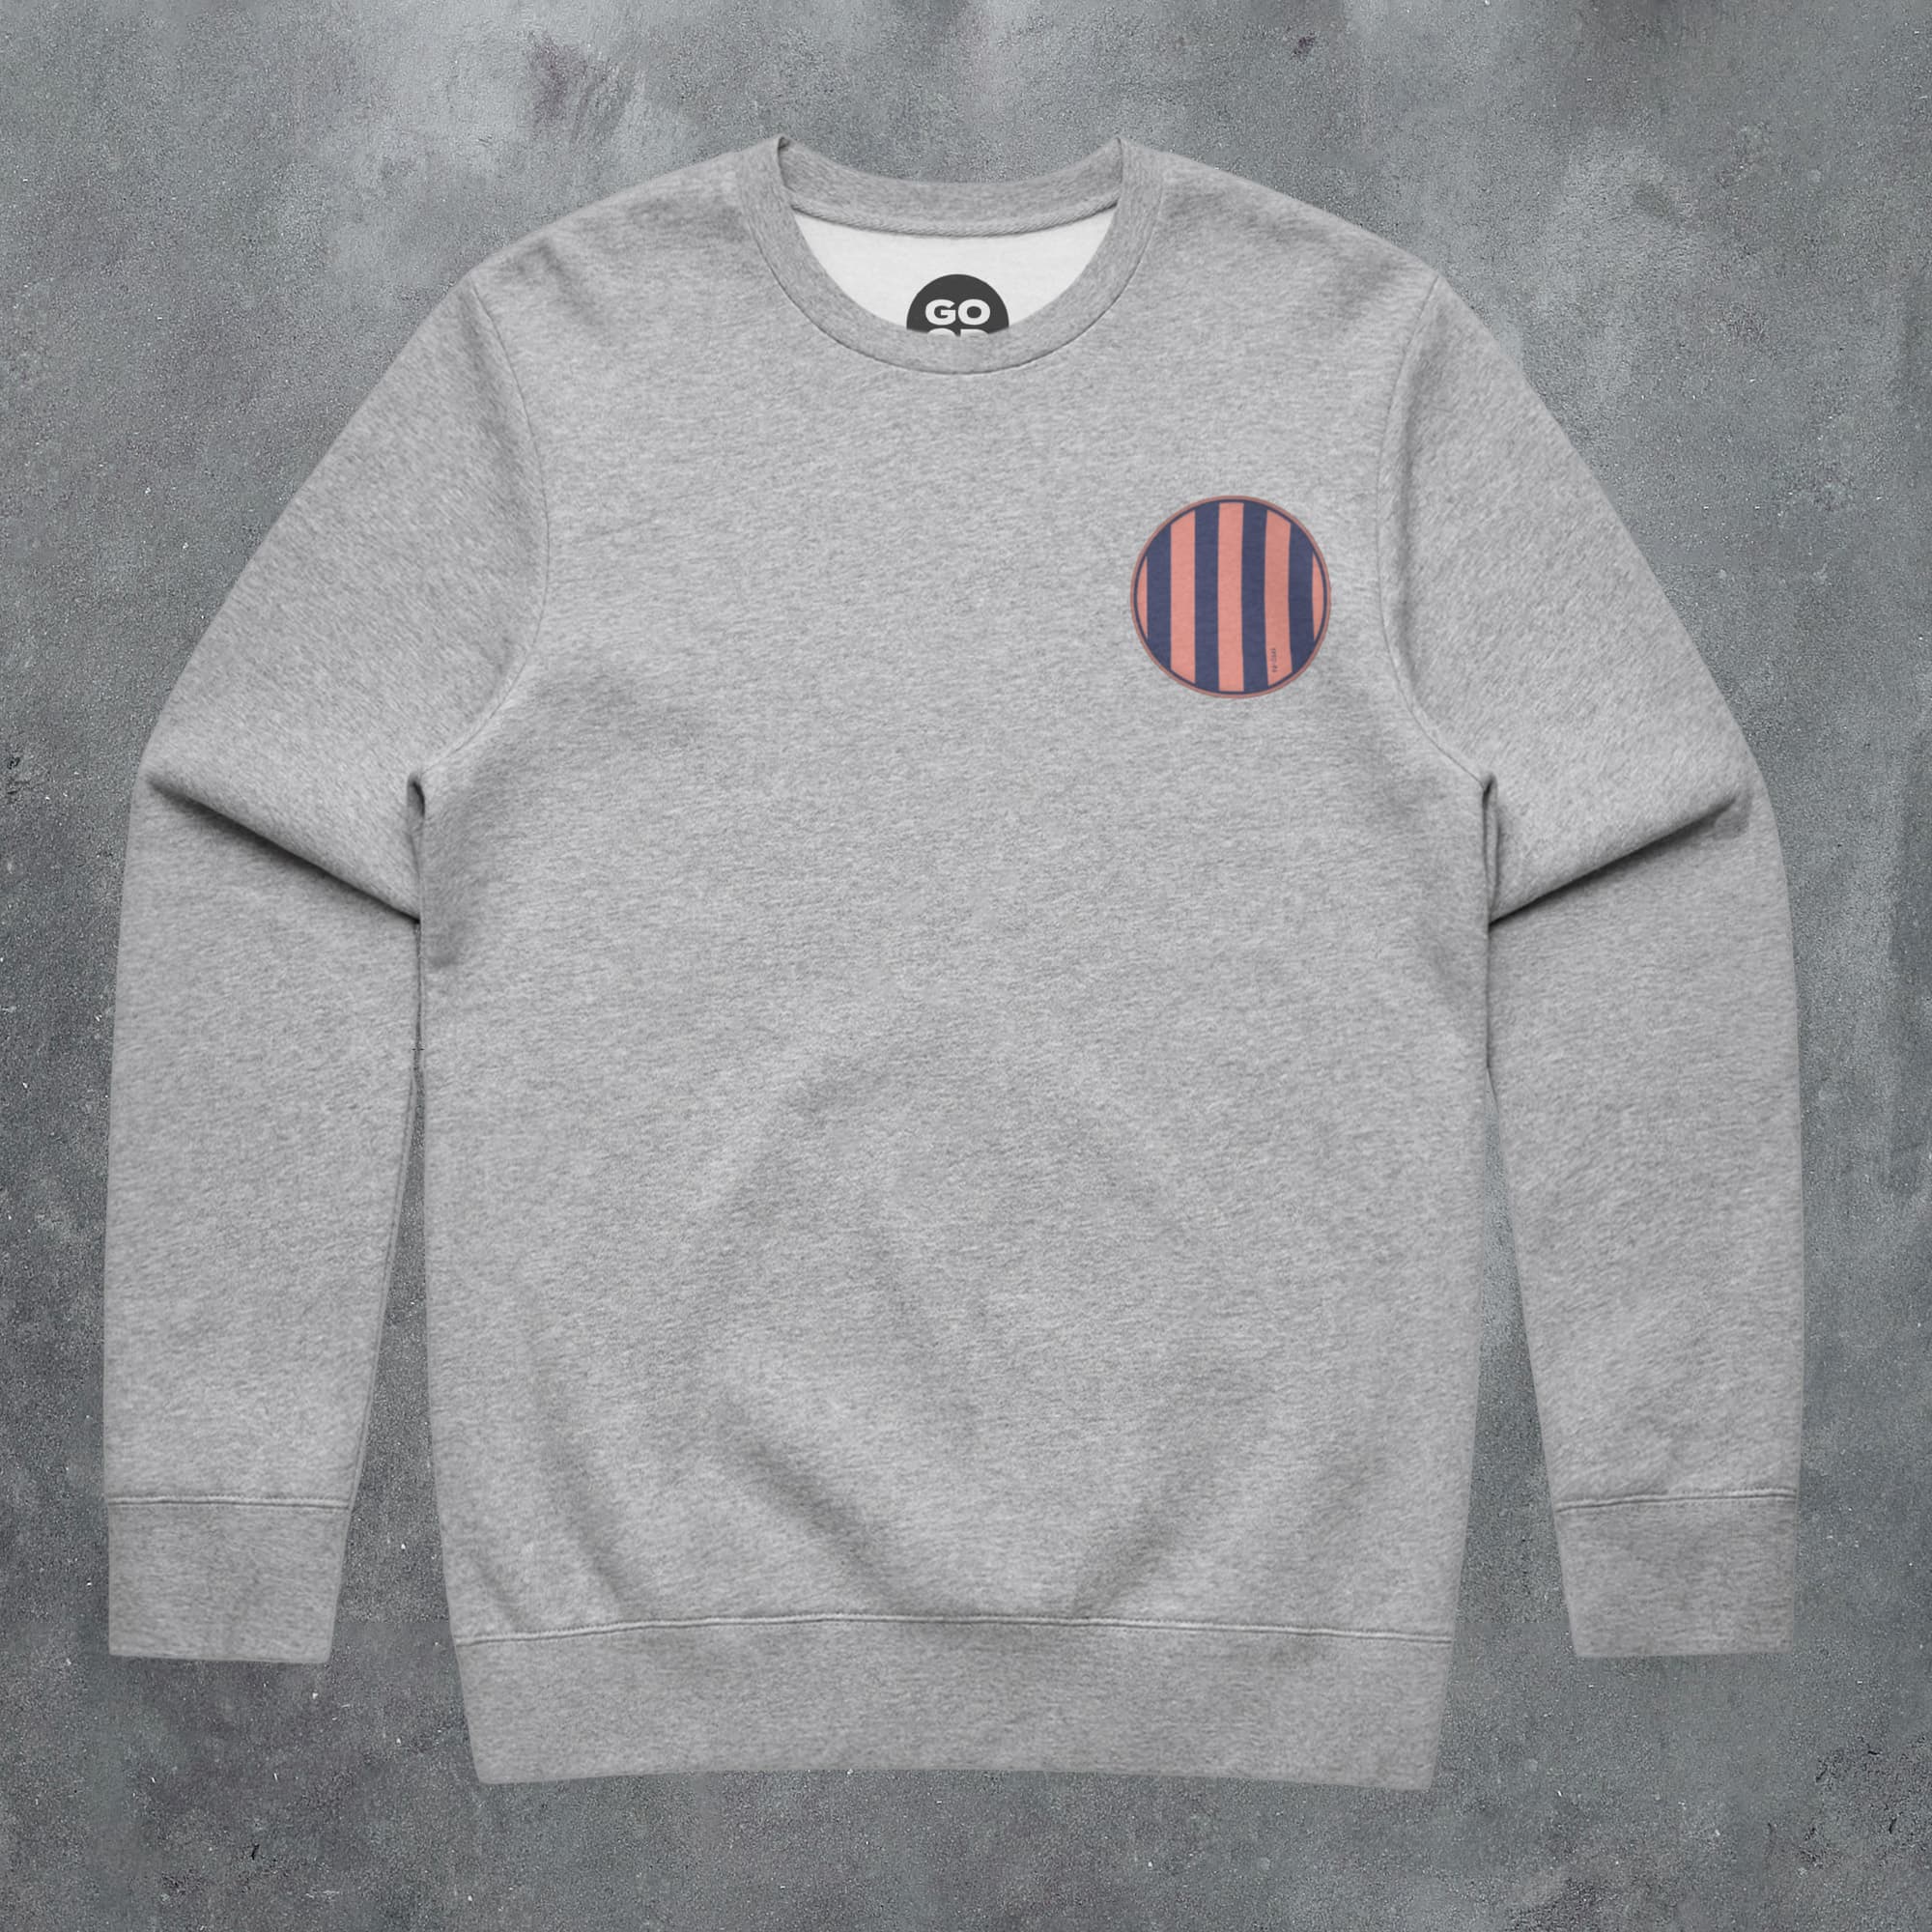 a grey sweatshirt with a red and blue stripe on the chest